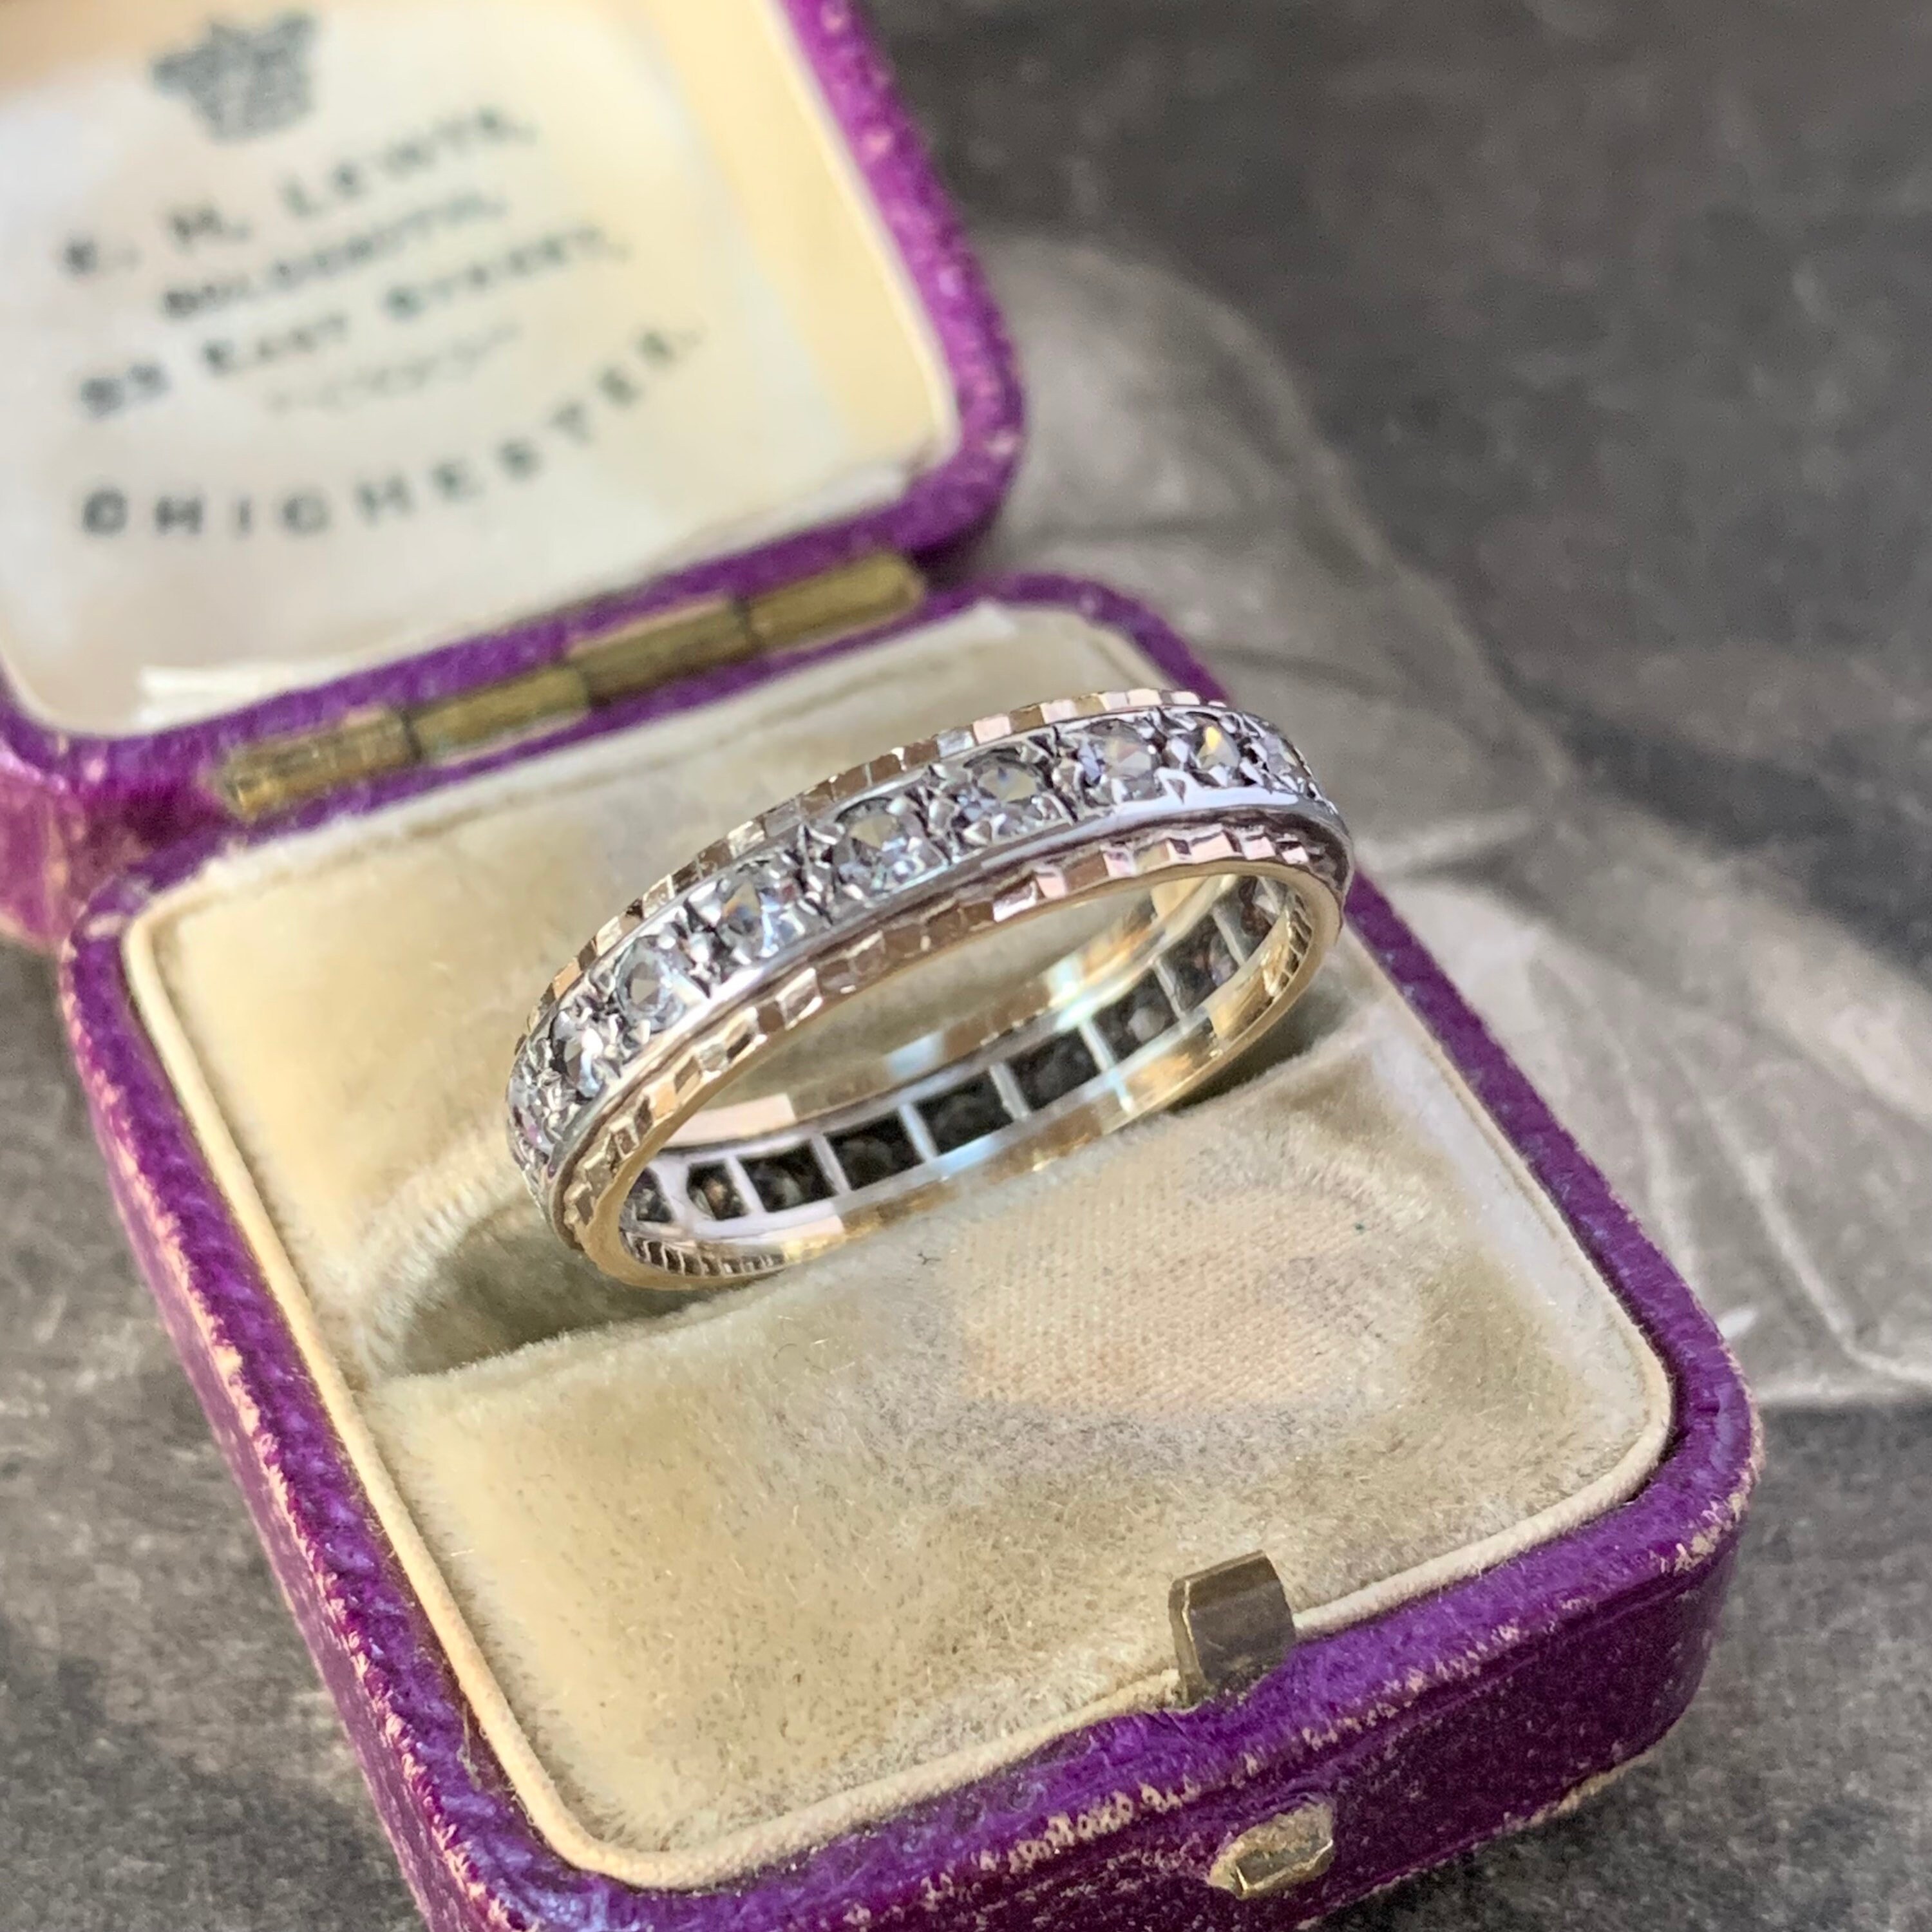 A Stunning Vintage Full Eternity Ring. Set With Tiny Bright & Sparkling White Quartz Stones Around The Entire Band in 9Ct Yellow Gold